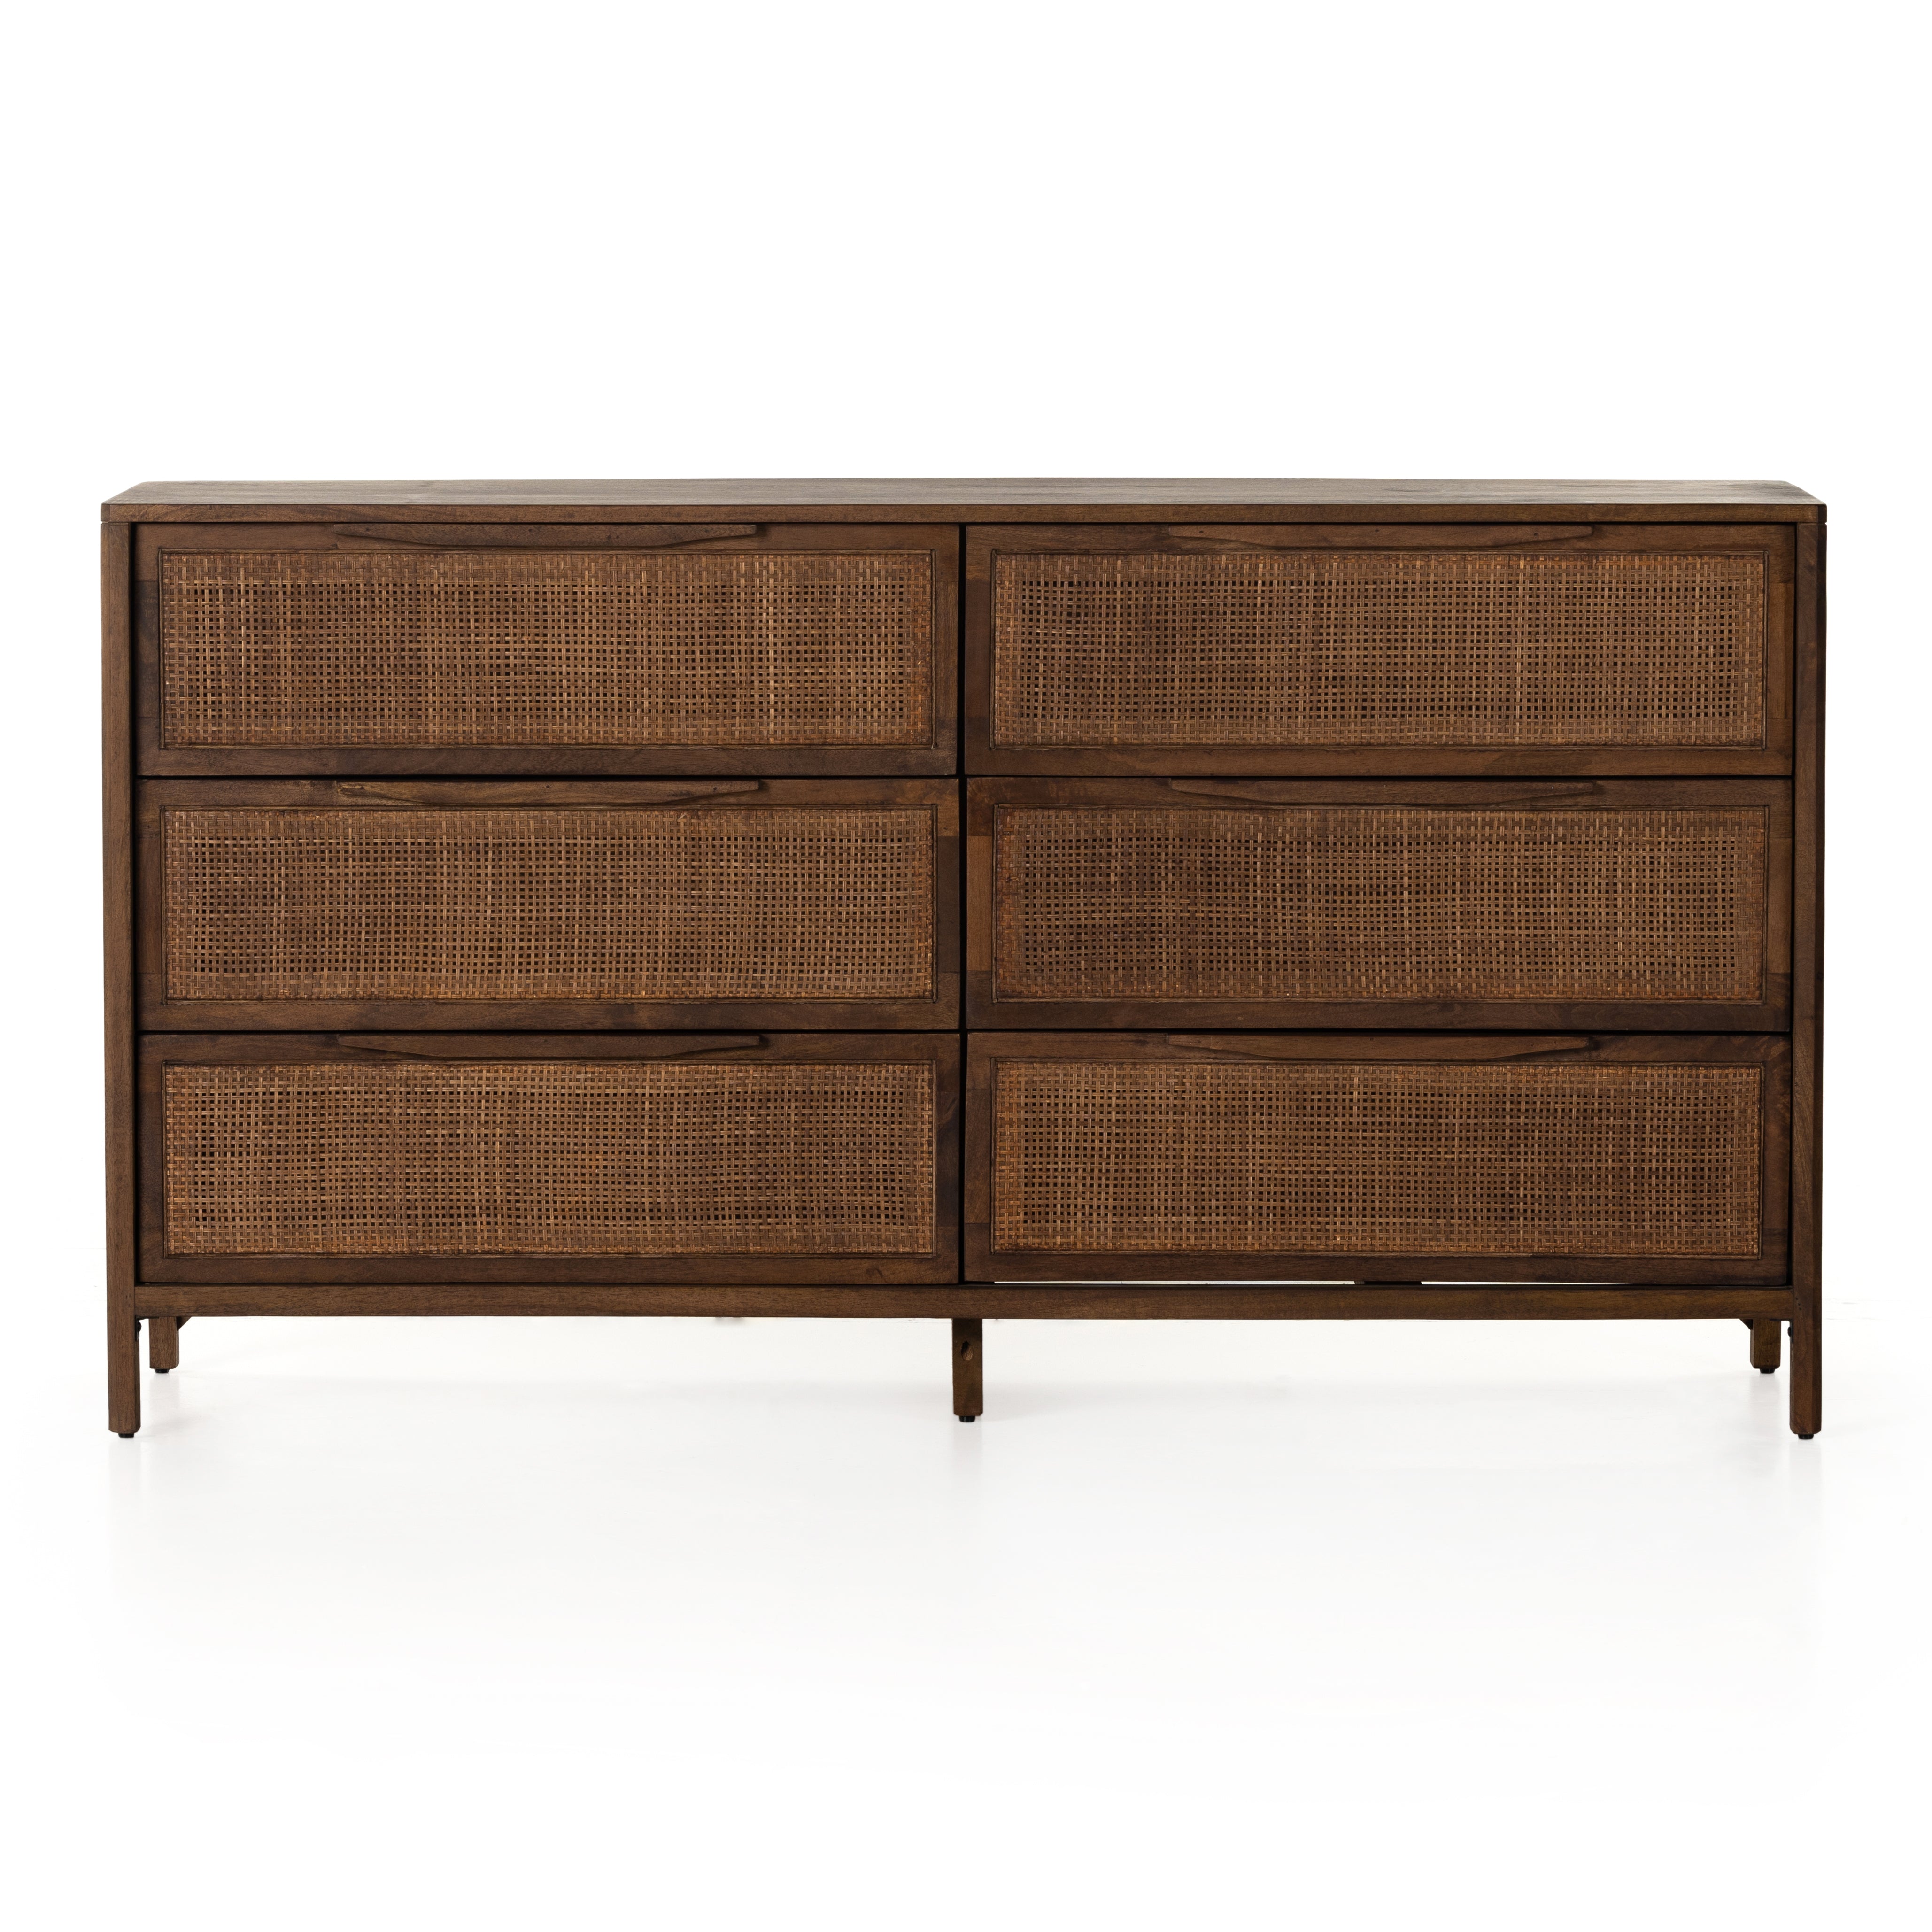 Sydney Brown Wash Drawer Dresser encases six spacious drawers of woven cane, for a textural look with monochromatic vibes. Amethyst Home provides interior design services, furniture, rugs, and lighting in the Austin metro area.